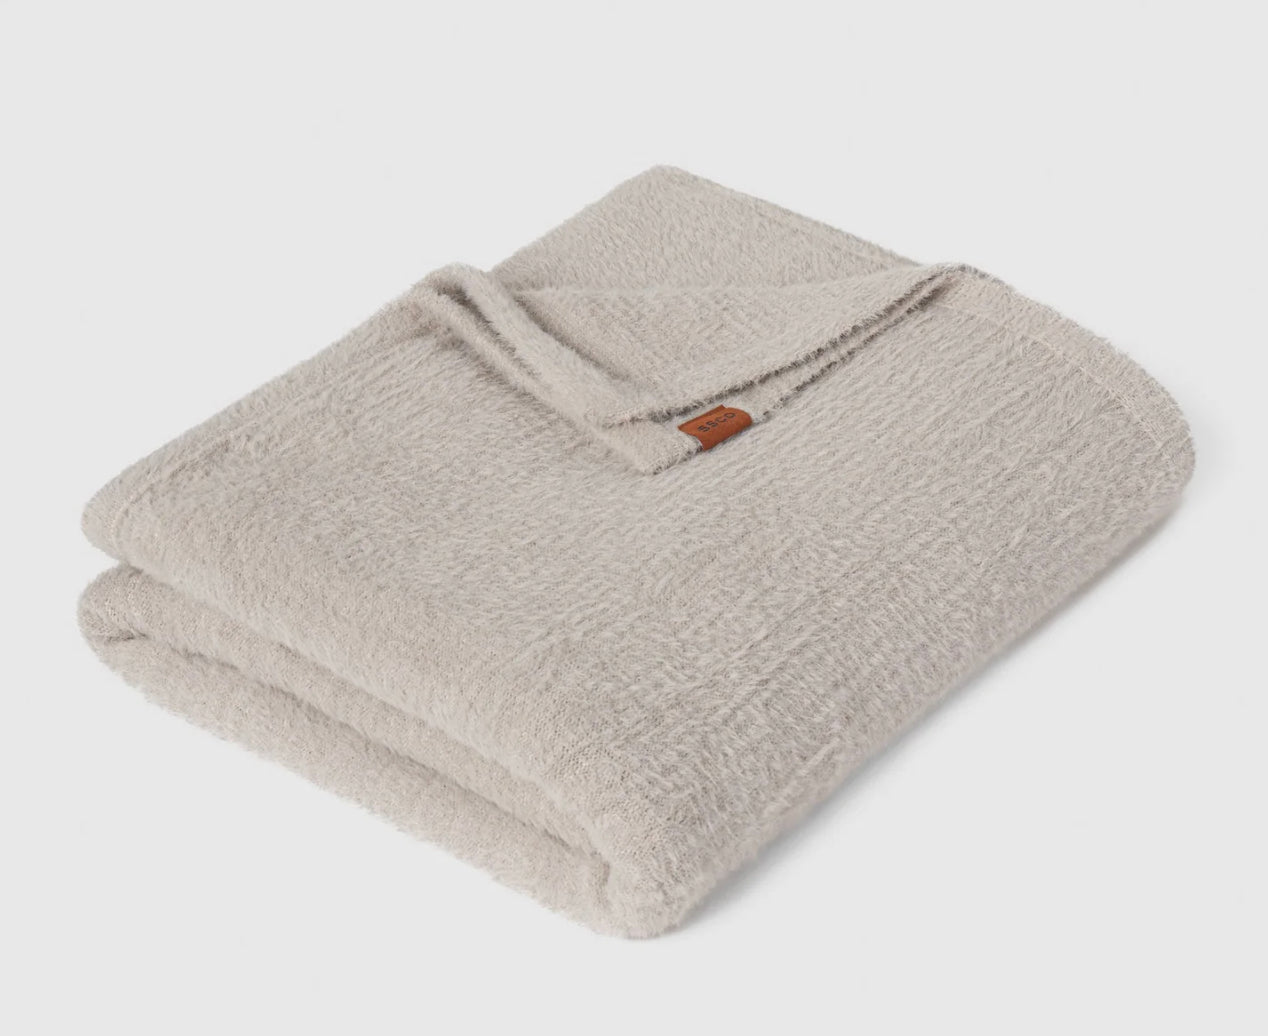 SSCO Feather Knit Blanket - OVERCAST